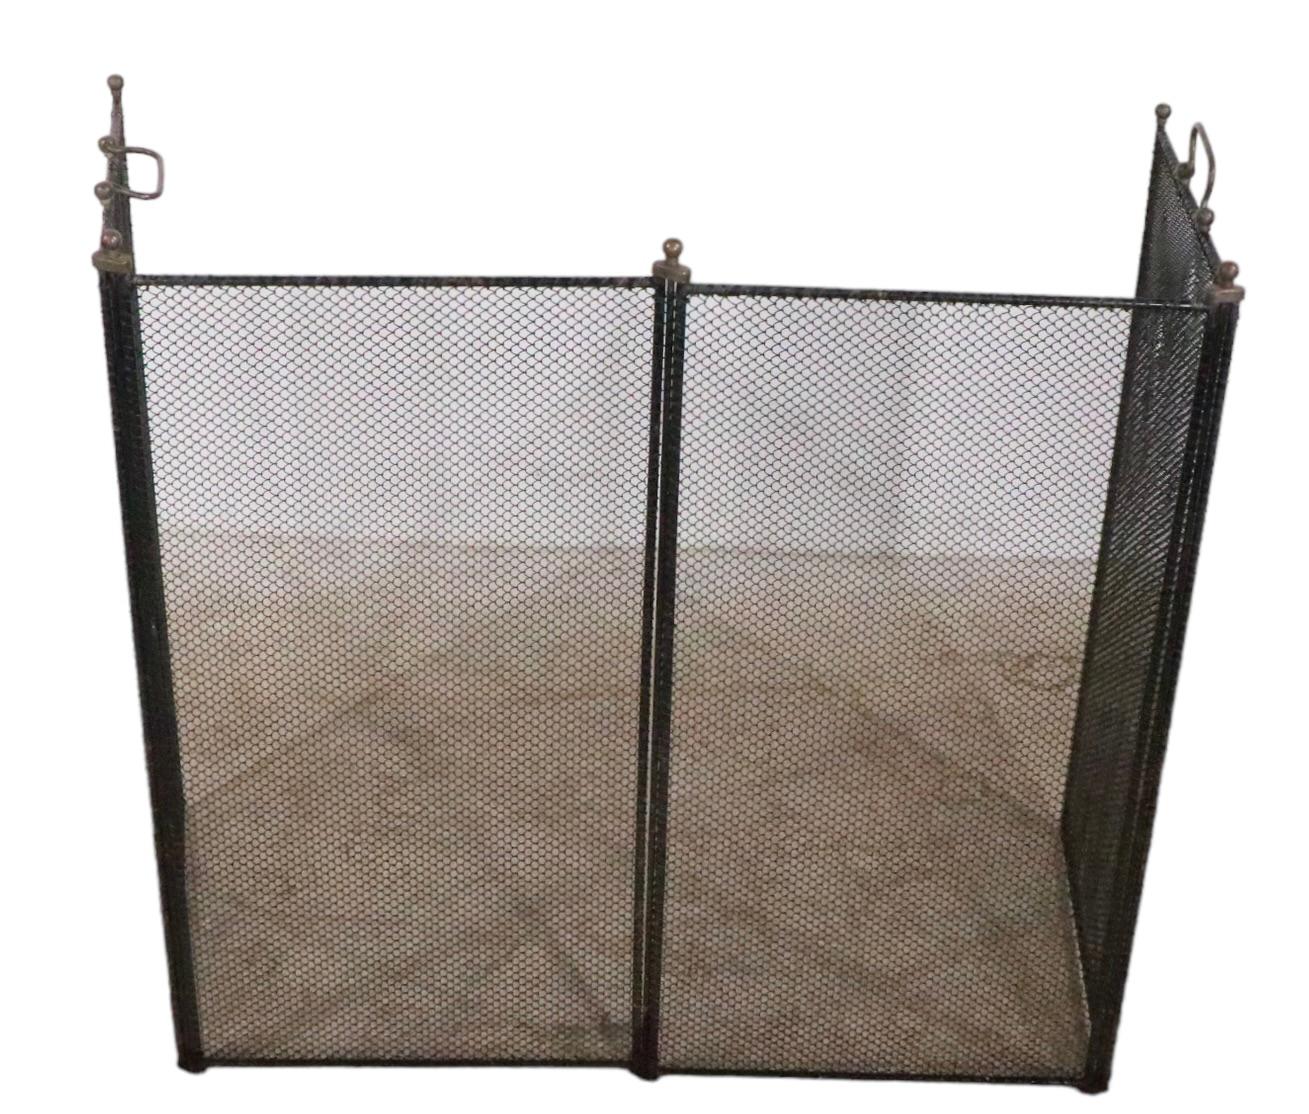 American Antique Iron Brass and Mesh Four Panel Folding   Fireplace Screen 